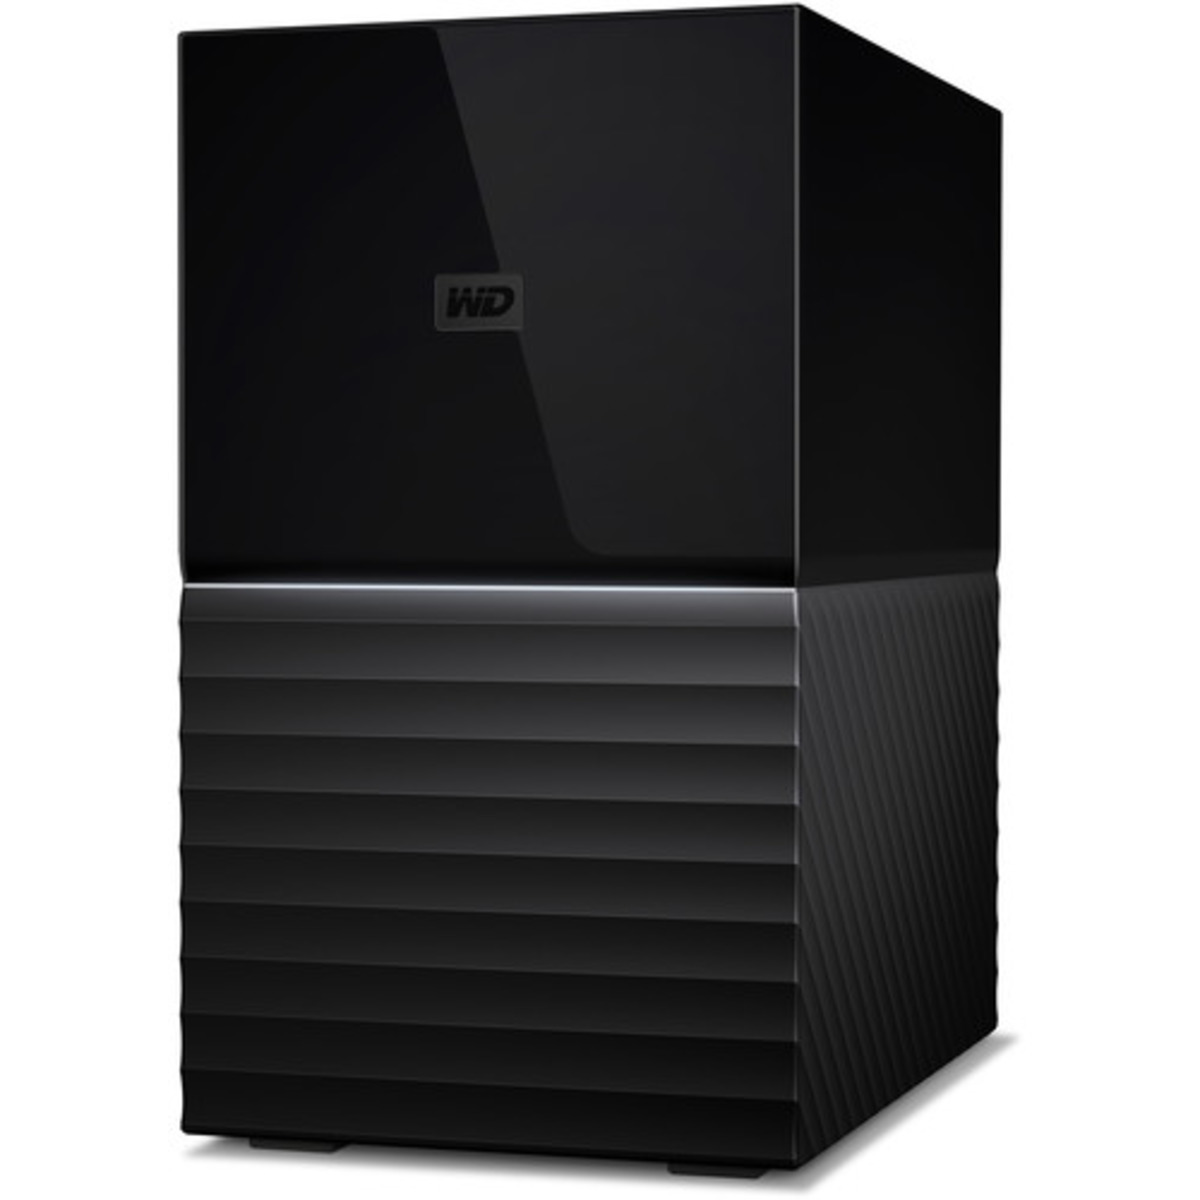 Western Digital My Book DUO Gen 2 22tb 2-Bay Desktop Personal / Basic Home / Small Office DAS - Direct Attached Storage Device 1x22tb Western Digital Ultrastar HC580 SED WUH722422ALE6L1 3.5 7200rpm SATA 6Gb/s HDD ENTERPRISE Class Drives Installed - Burn-In Tested - ON SALE My Book DUO Gen 2